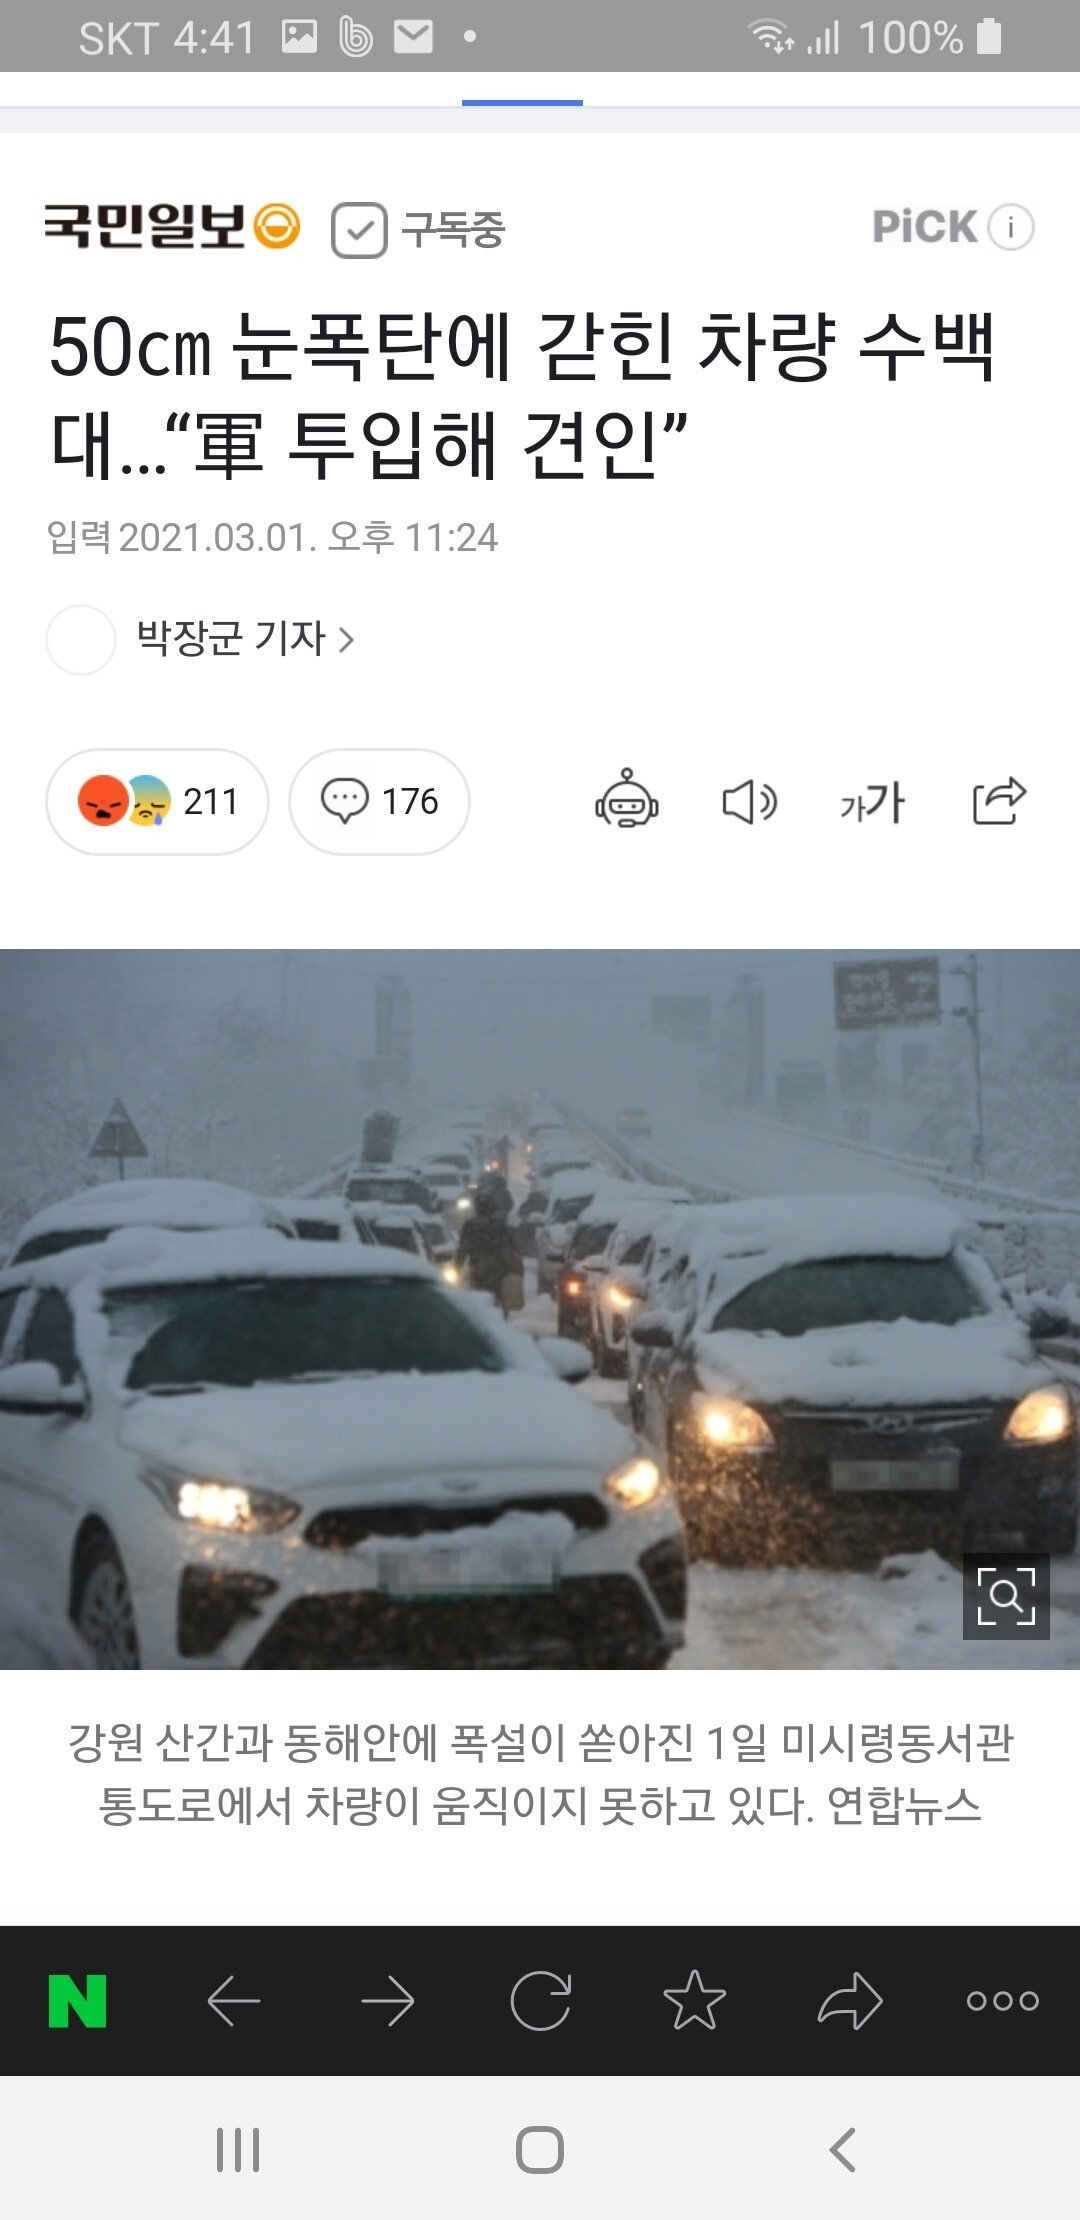 Hundreds of vehicles trapped by heavy snow